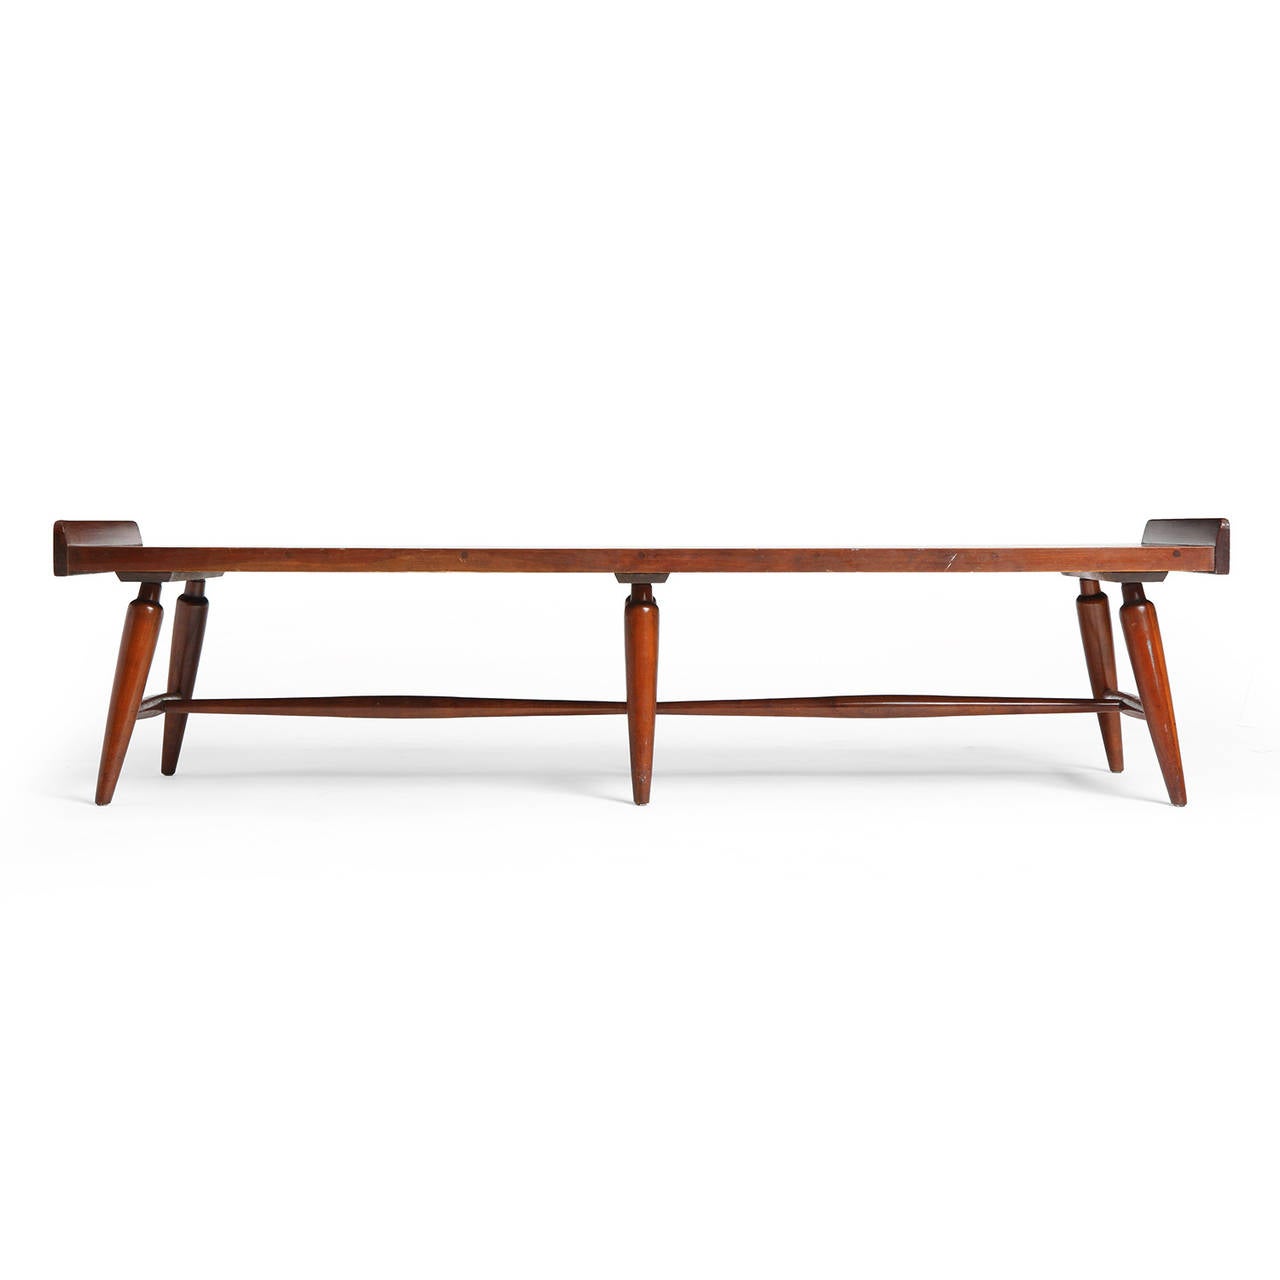 A walnut low table having a long rectangular top with raised end rails resting on a six-legged base with turned legs  and stretchers. The legs attach to the top with a through tenon detail.